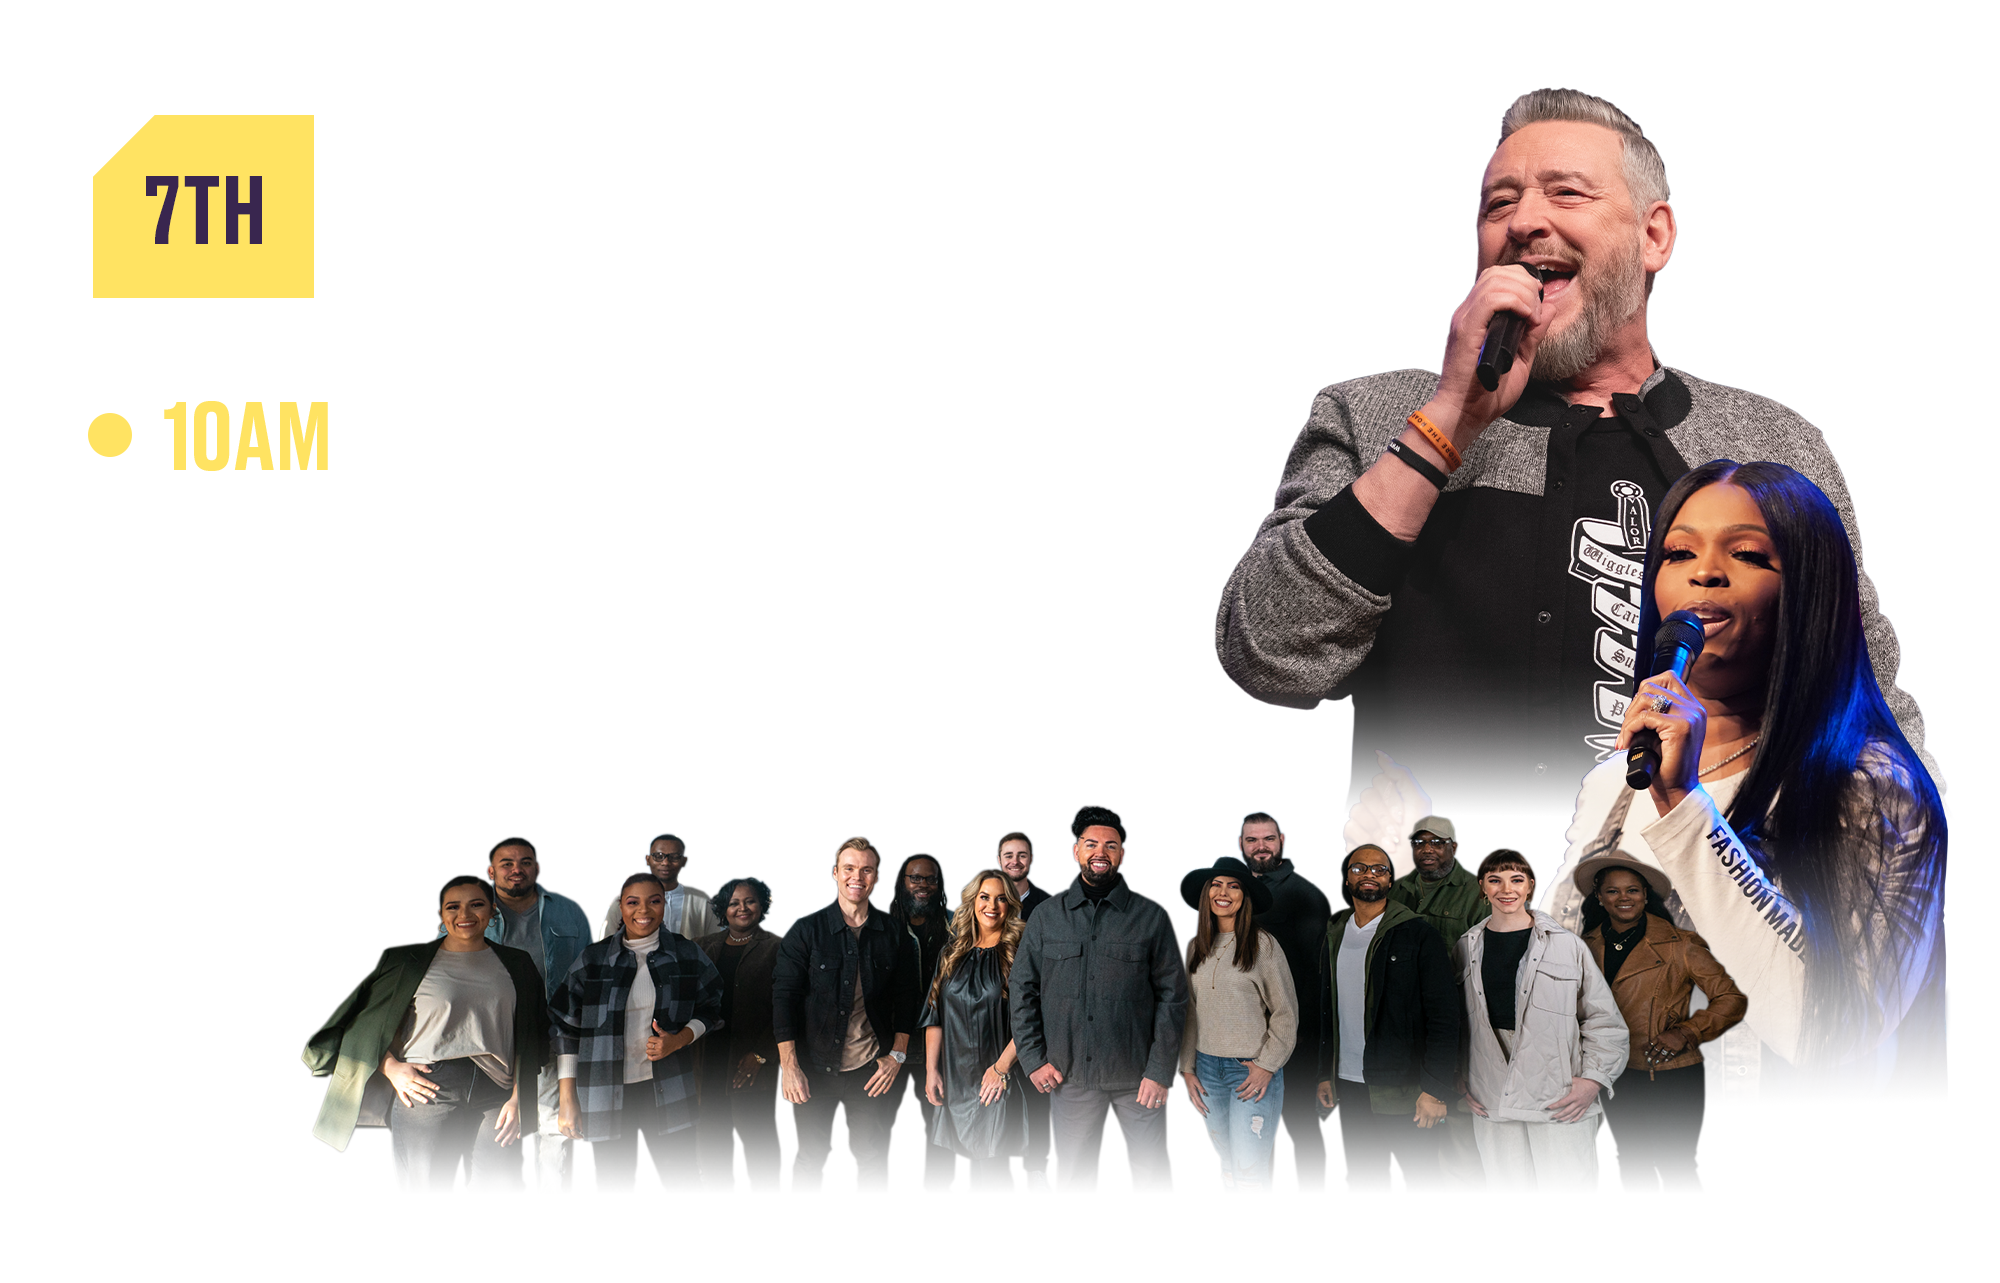 7th Sunday Morning 10AM With Dr. Rod Parsley, Shana Wilson-Williams and Harvest Music Live